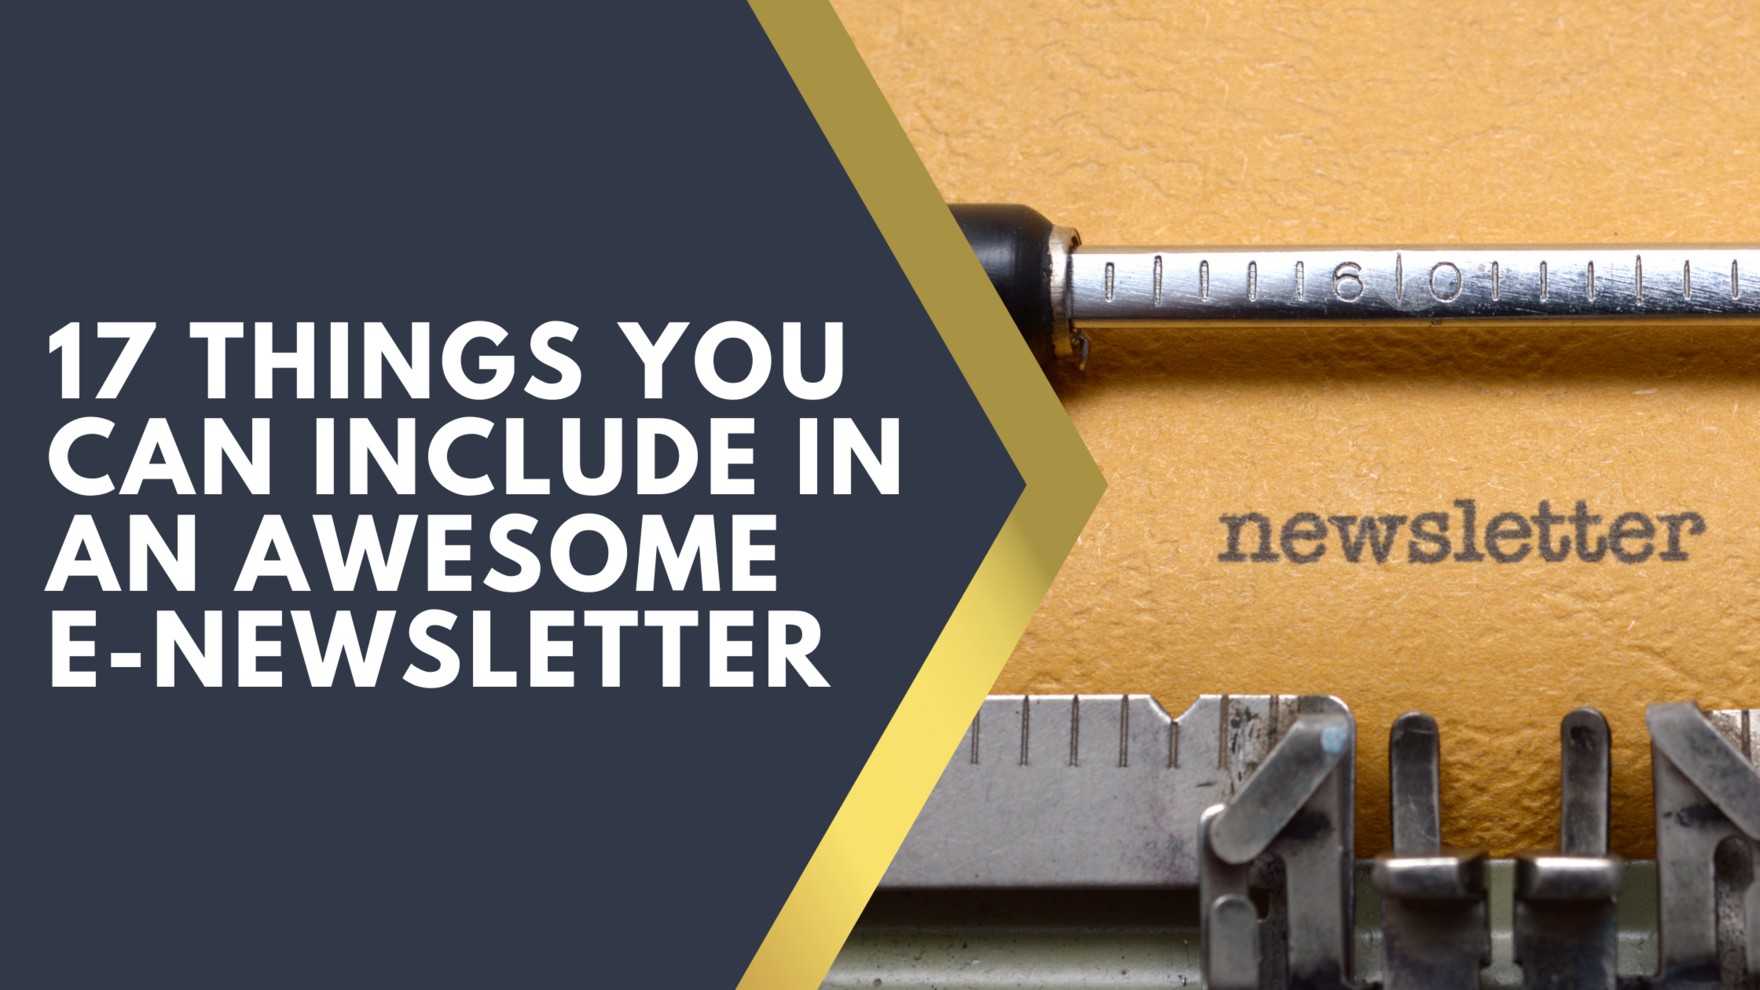 17 THINGS YOU CAN INCLUDE IN AN AWESOME  E-NEWSLETTER